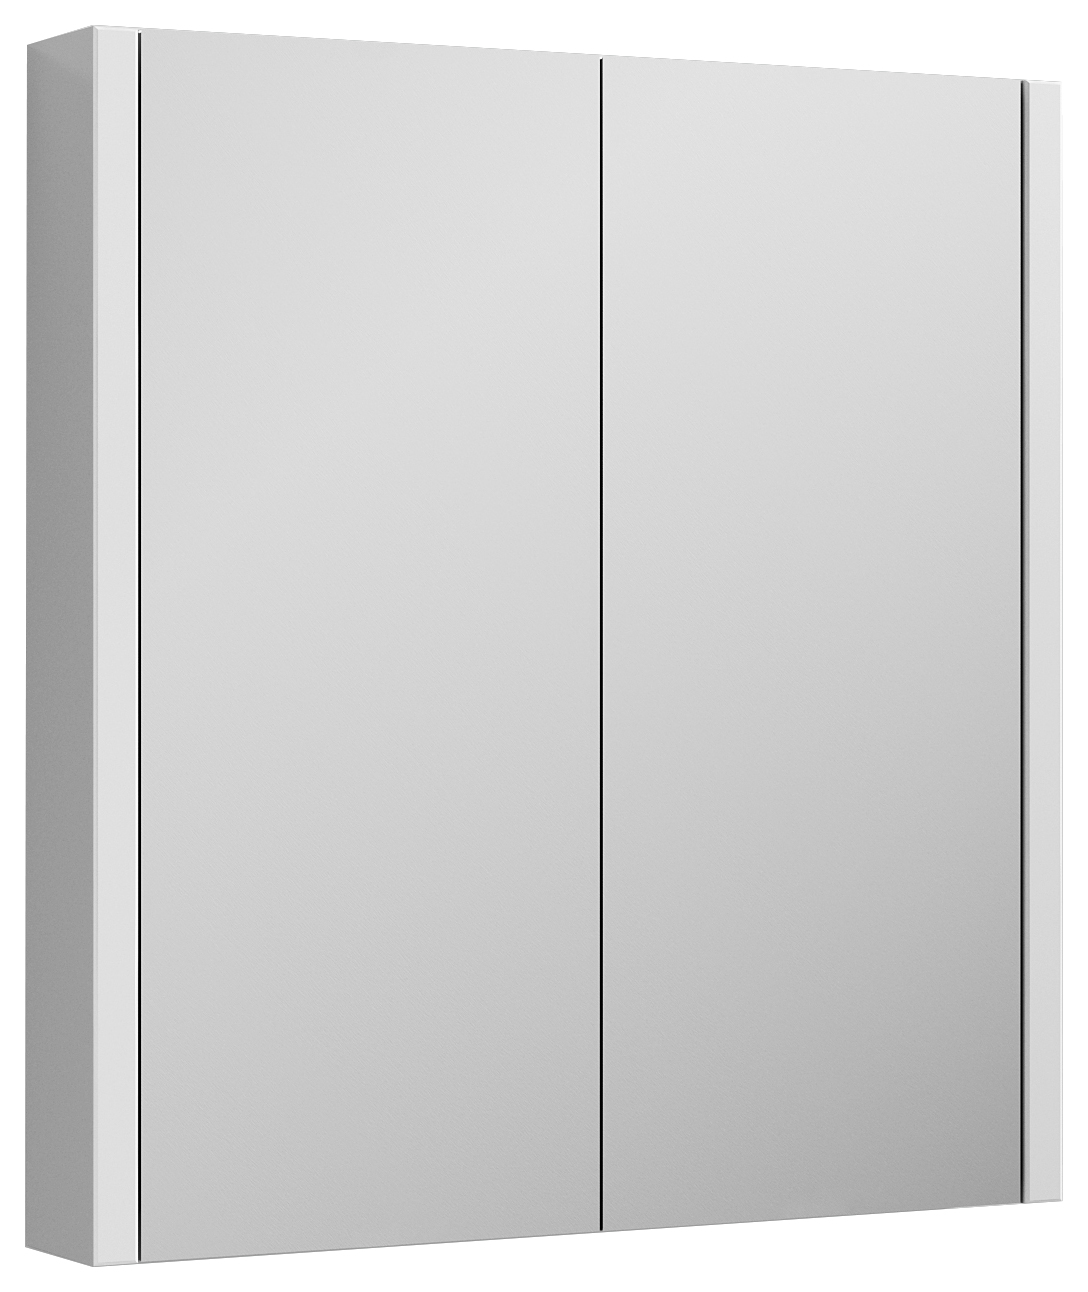 Nuie Parade Gloss White Double Door Mirrored Cabinet - 650 x 617mm